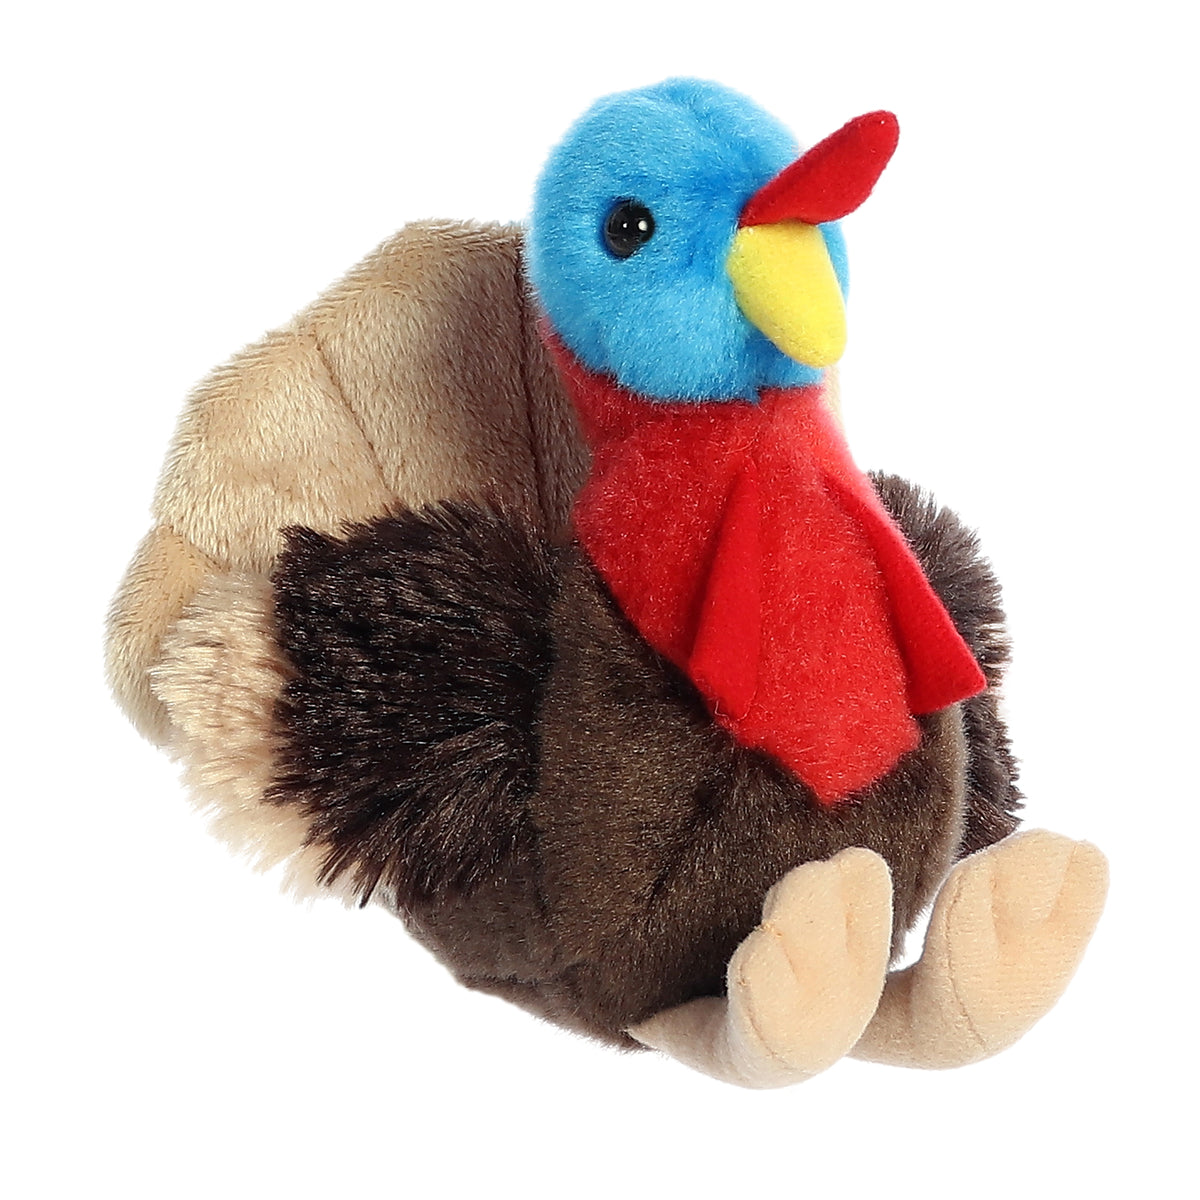 Thomas Turkey plushie with a blue head, red neck, and a cozy chocolate body, inviting adorable, huggable fun for all.